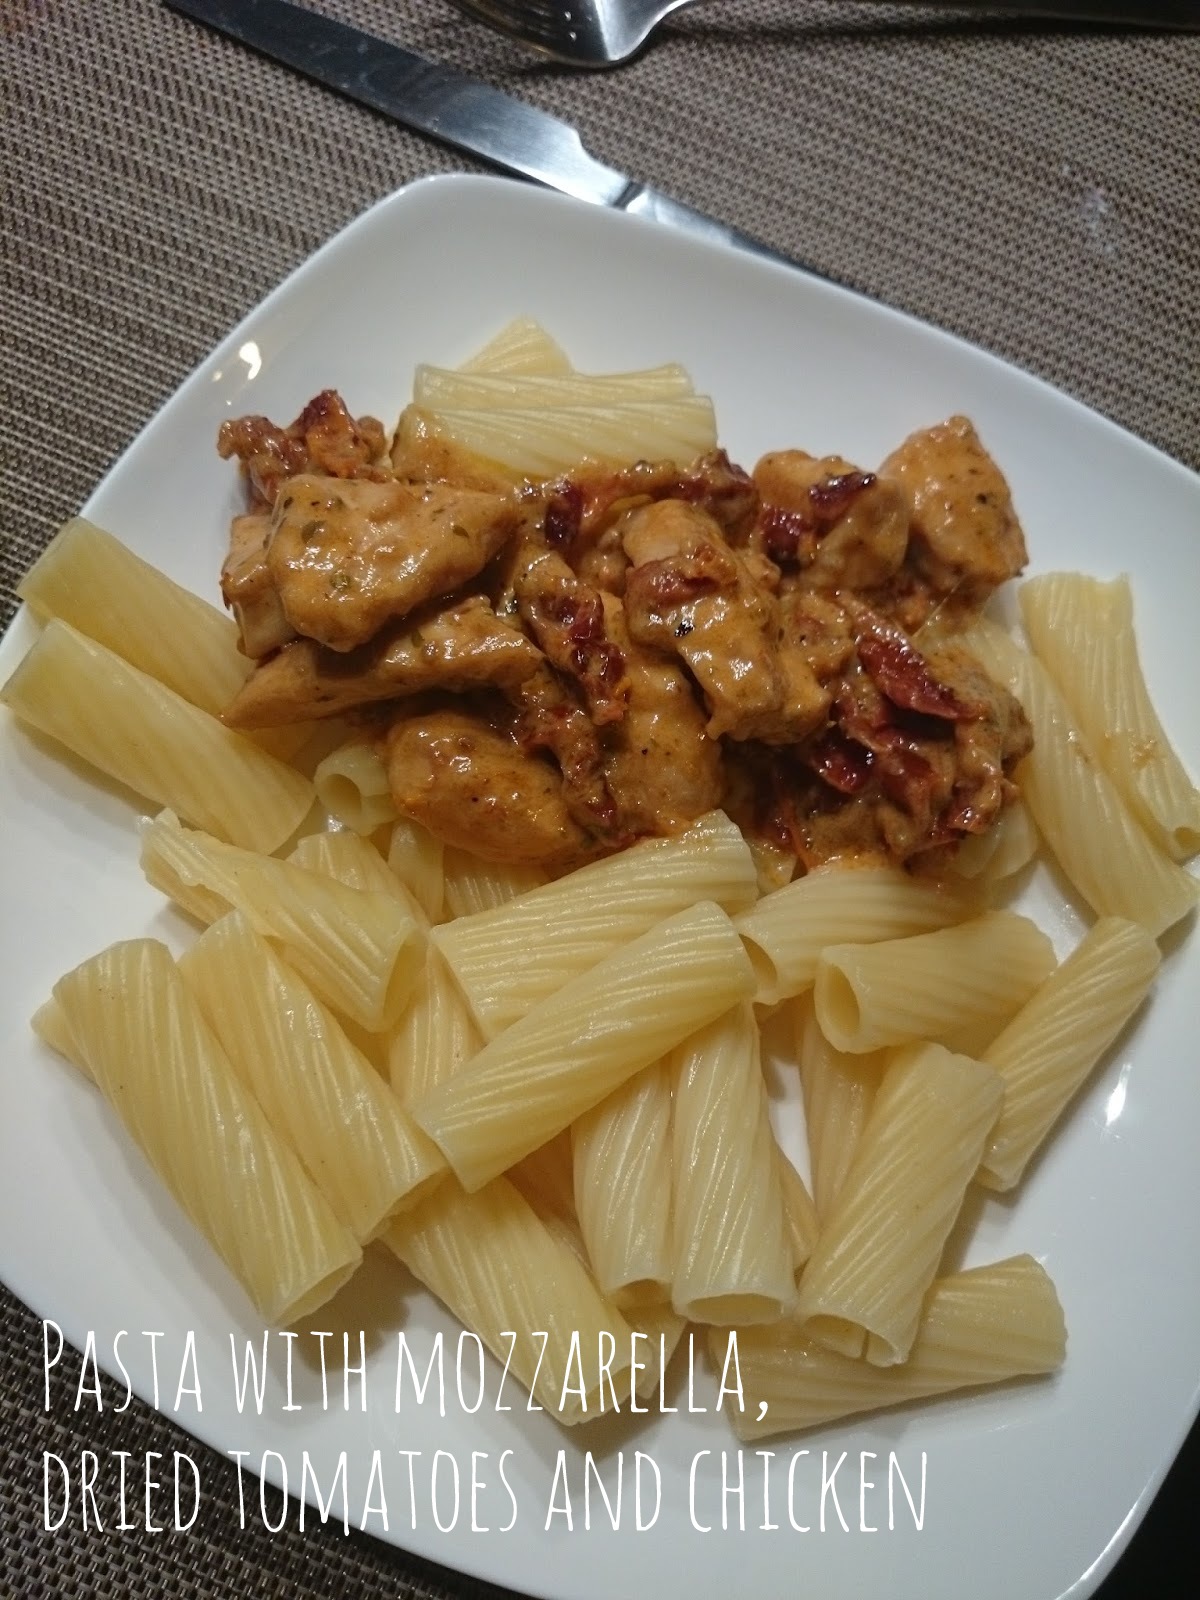 Pasta with mozzarella, dried tomatoes and chicken